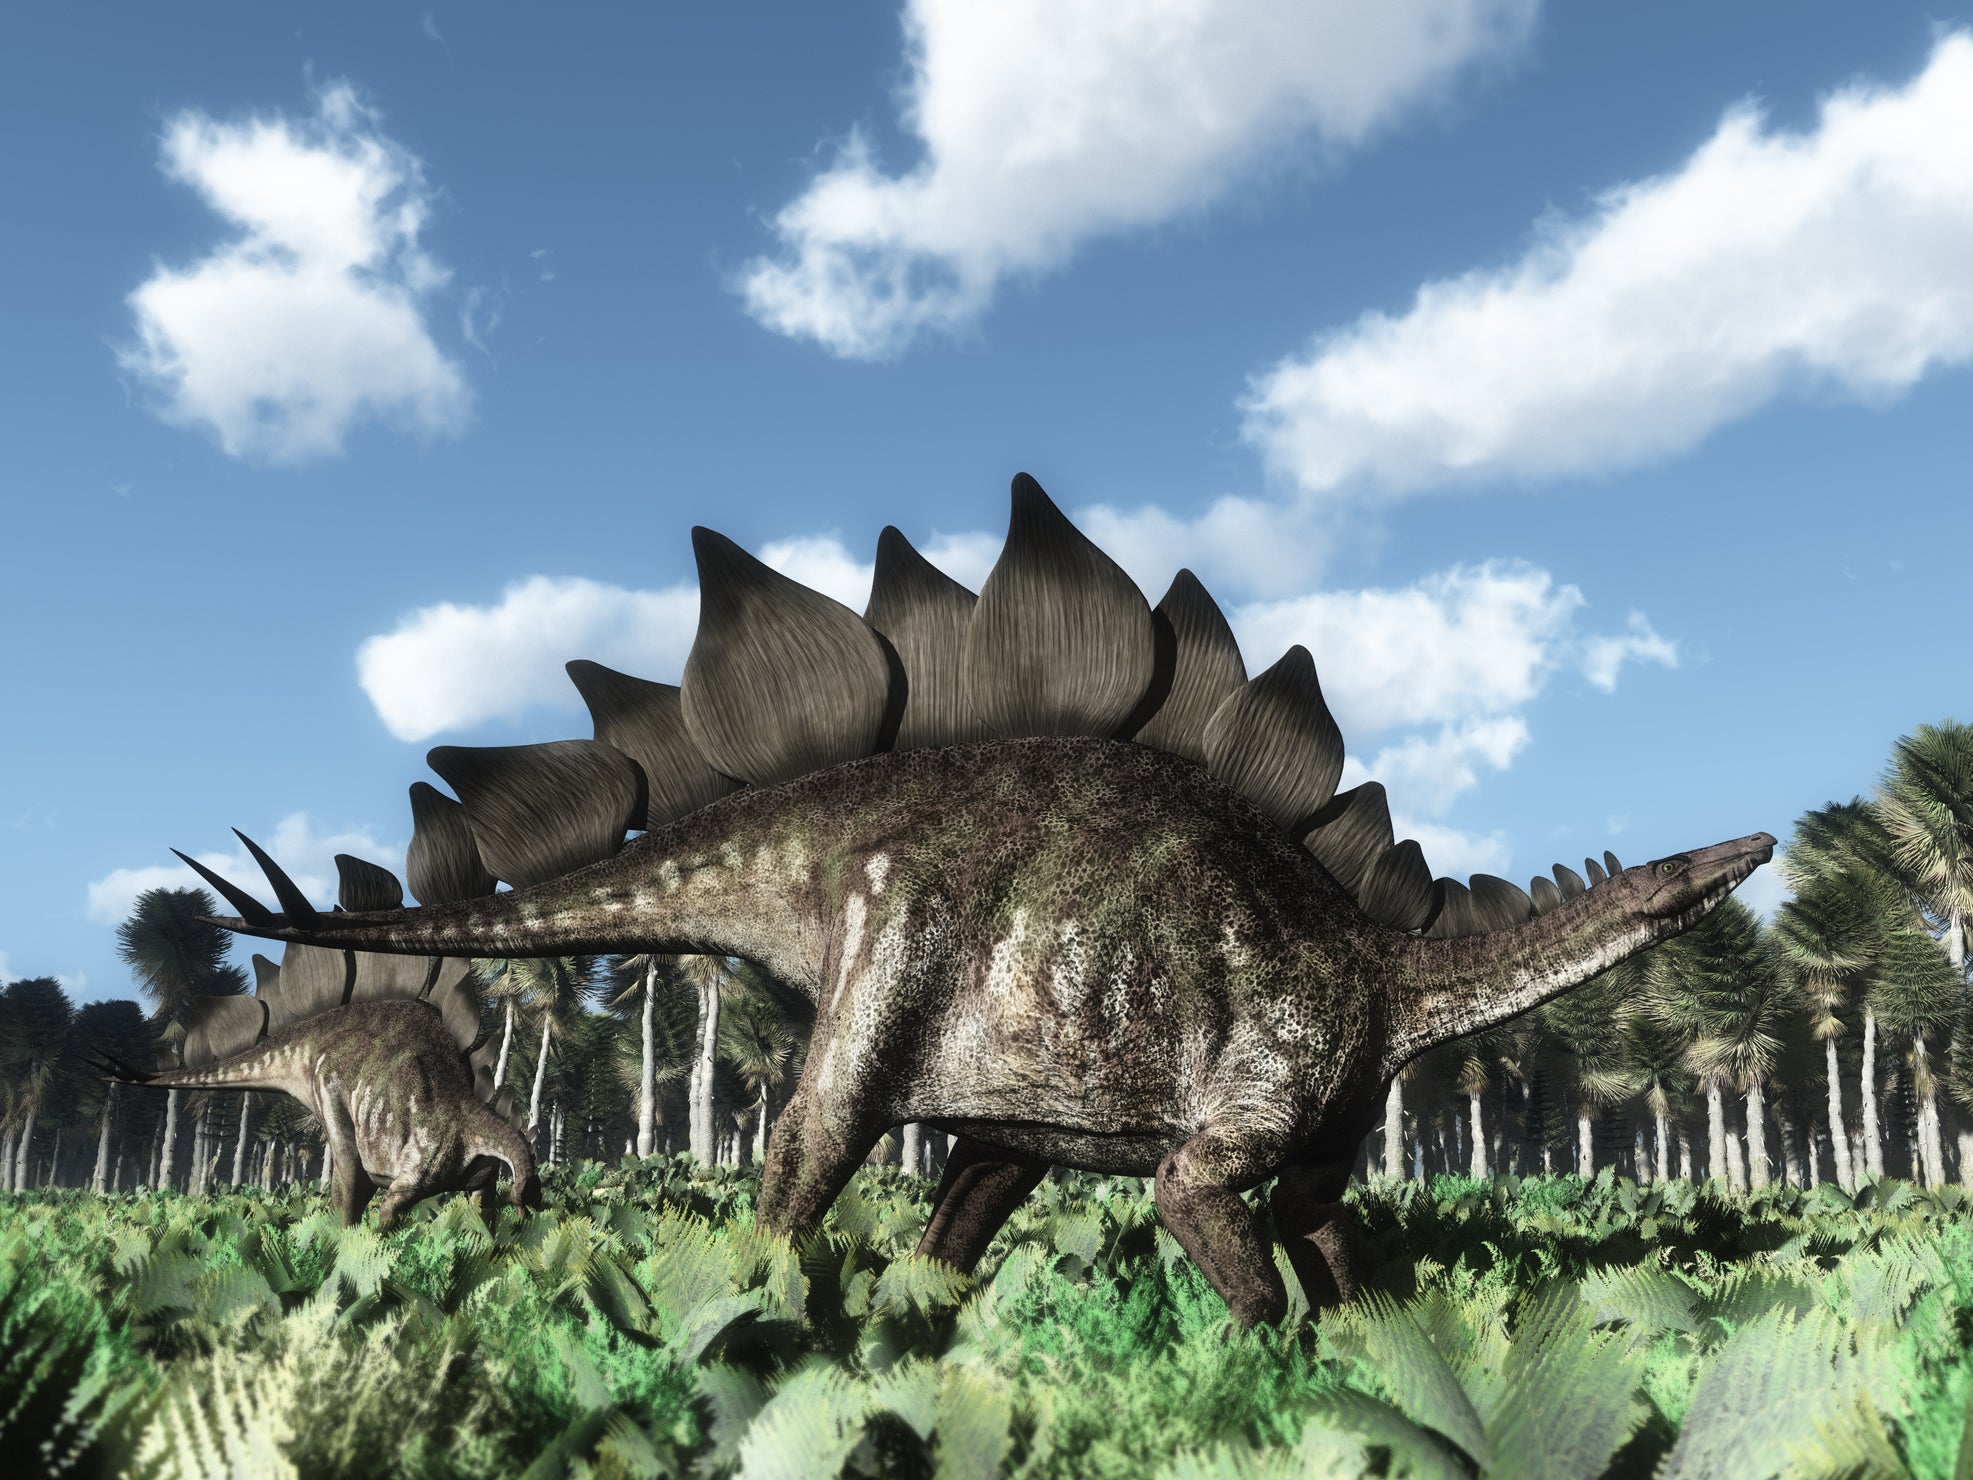 Scientists said despite the limited number of fossils they had to work with, the specimens were sufficient for them to identify them as belonging to a new species of stegosaur